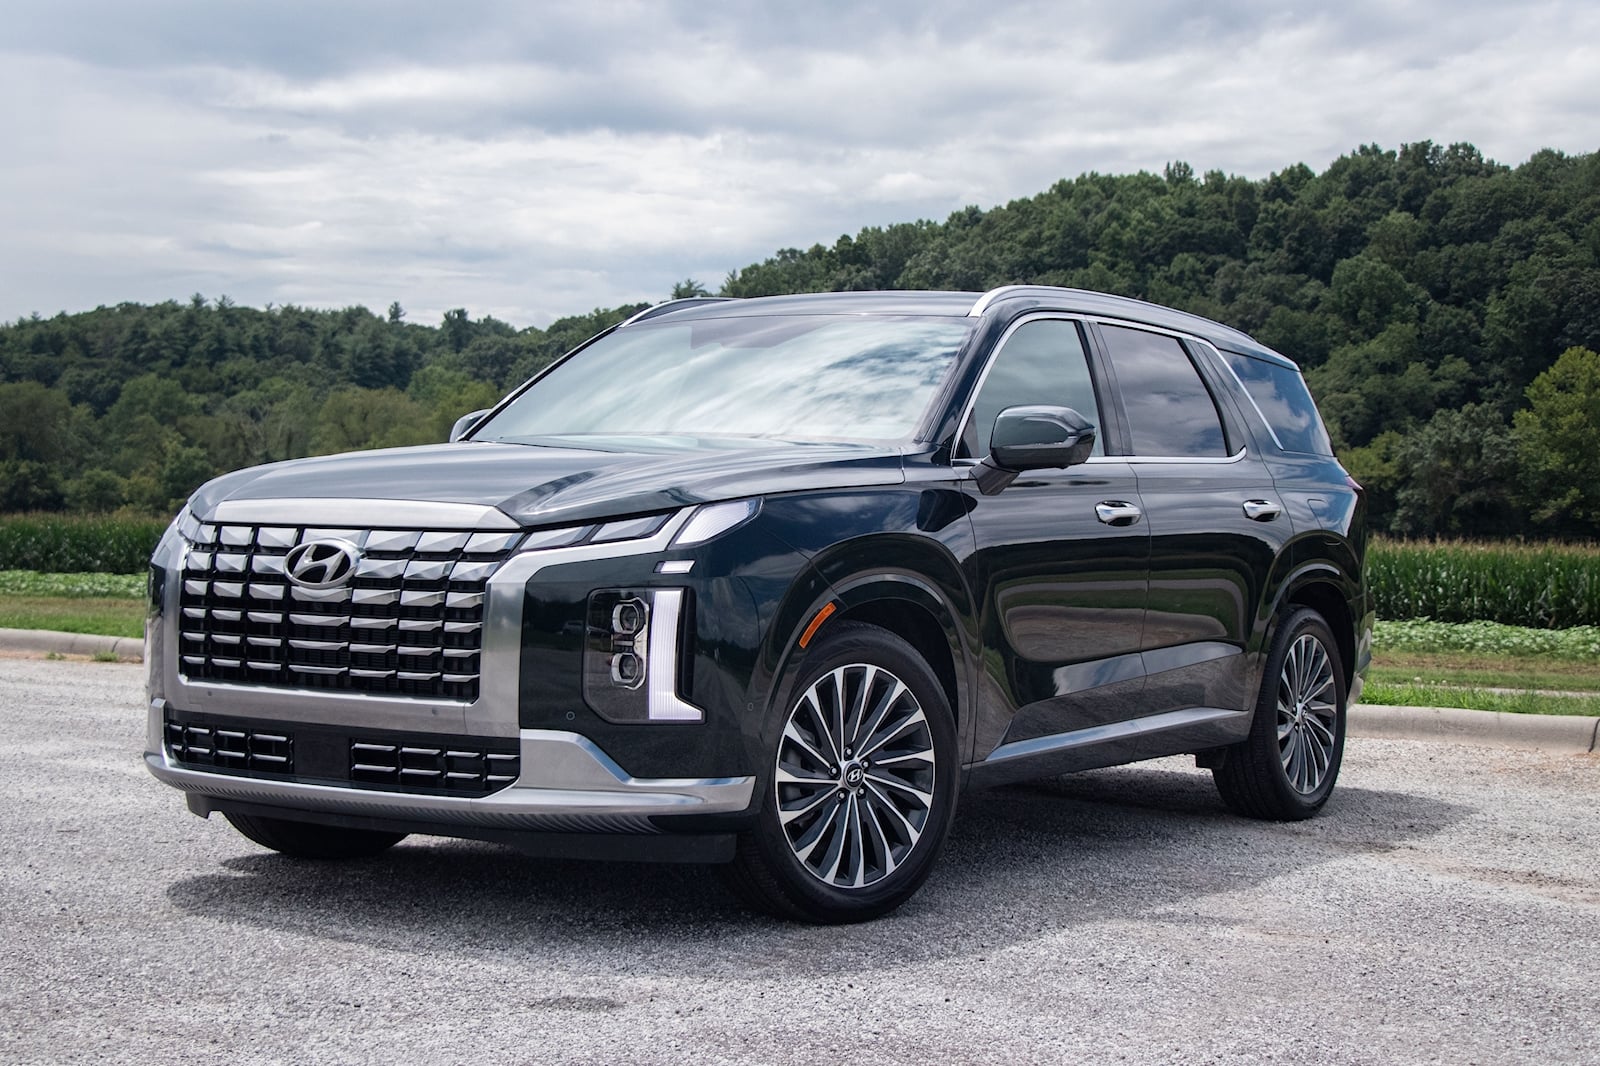 Hyundai Palisade And Kia Telluride Recalled For Fire Risk